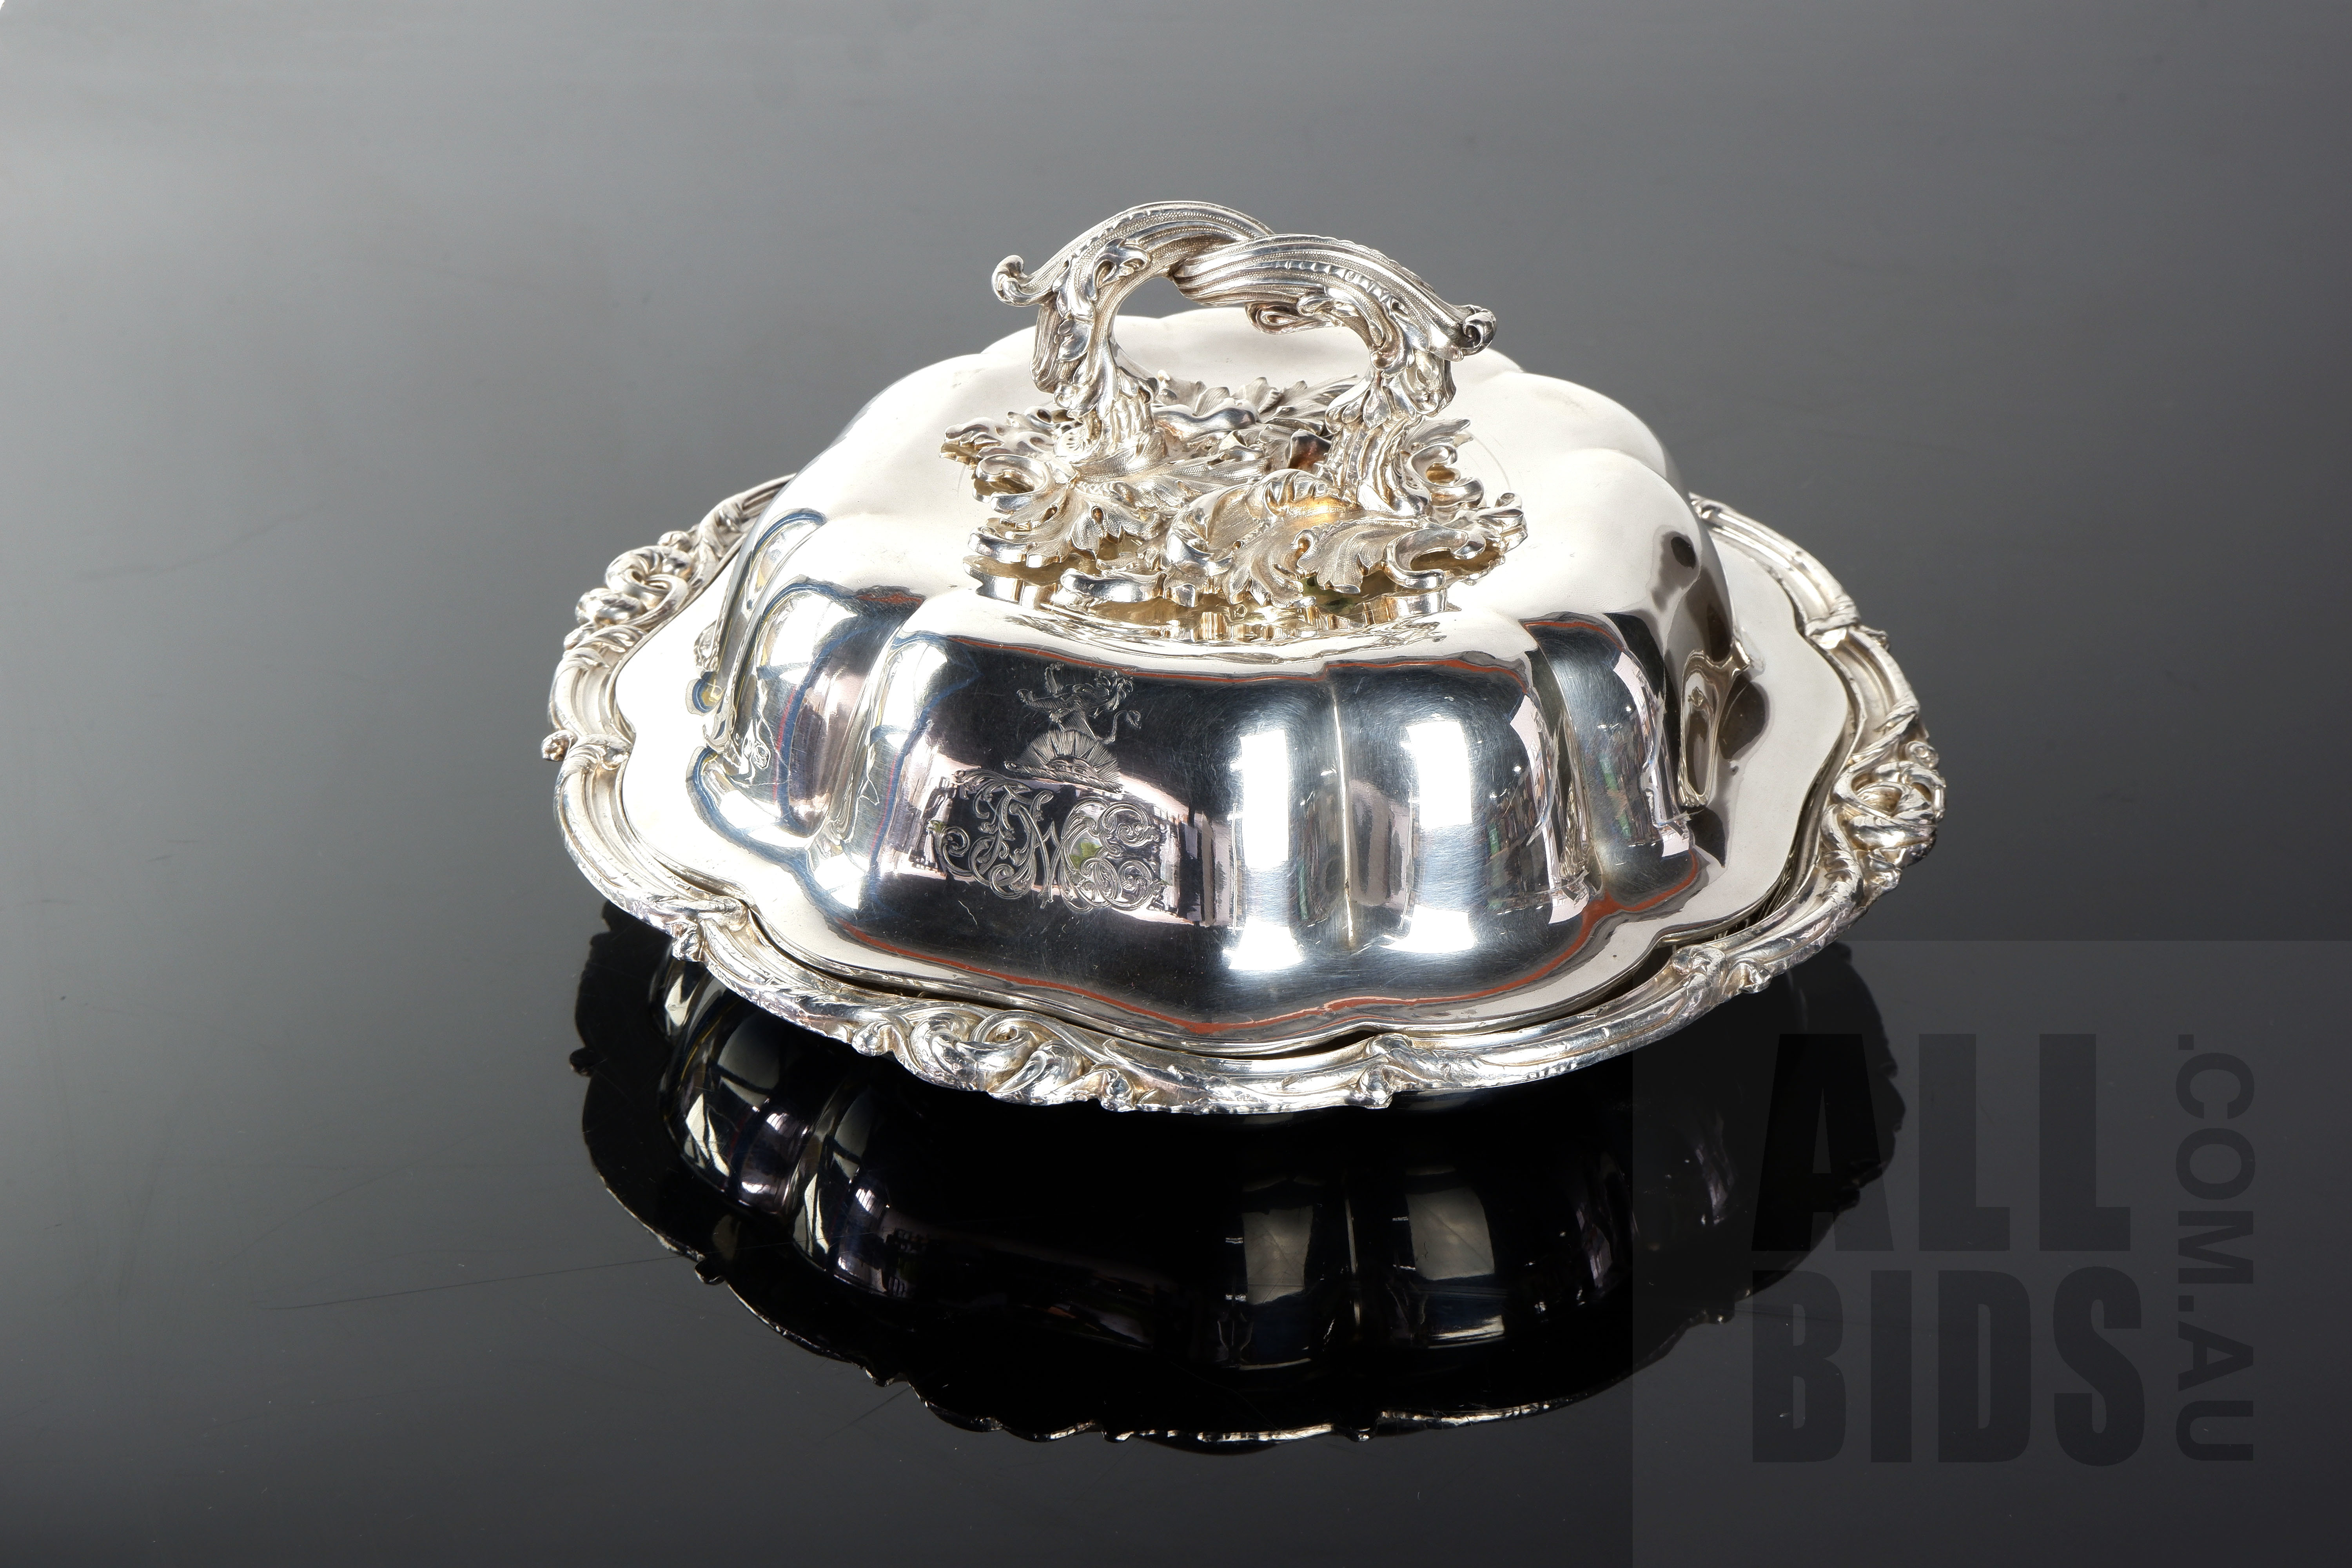 'Fine Regency Sheffield Plate and Sterling Silver Entree Dish, the Cover and Solid Cast Handle in Sterling by Eminent Silversmith Paul Storr, Early 19th Century'